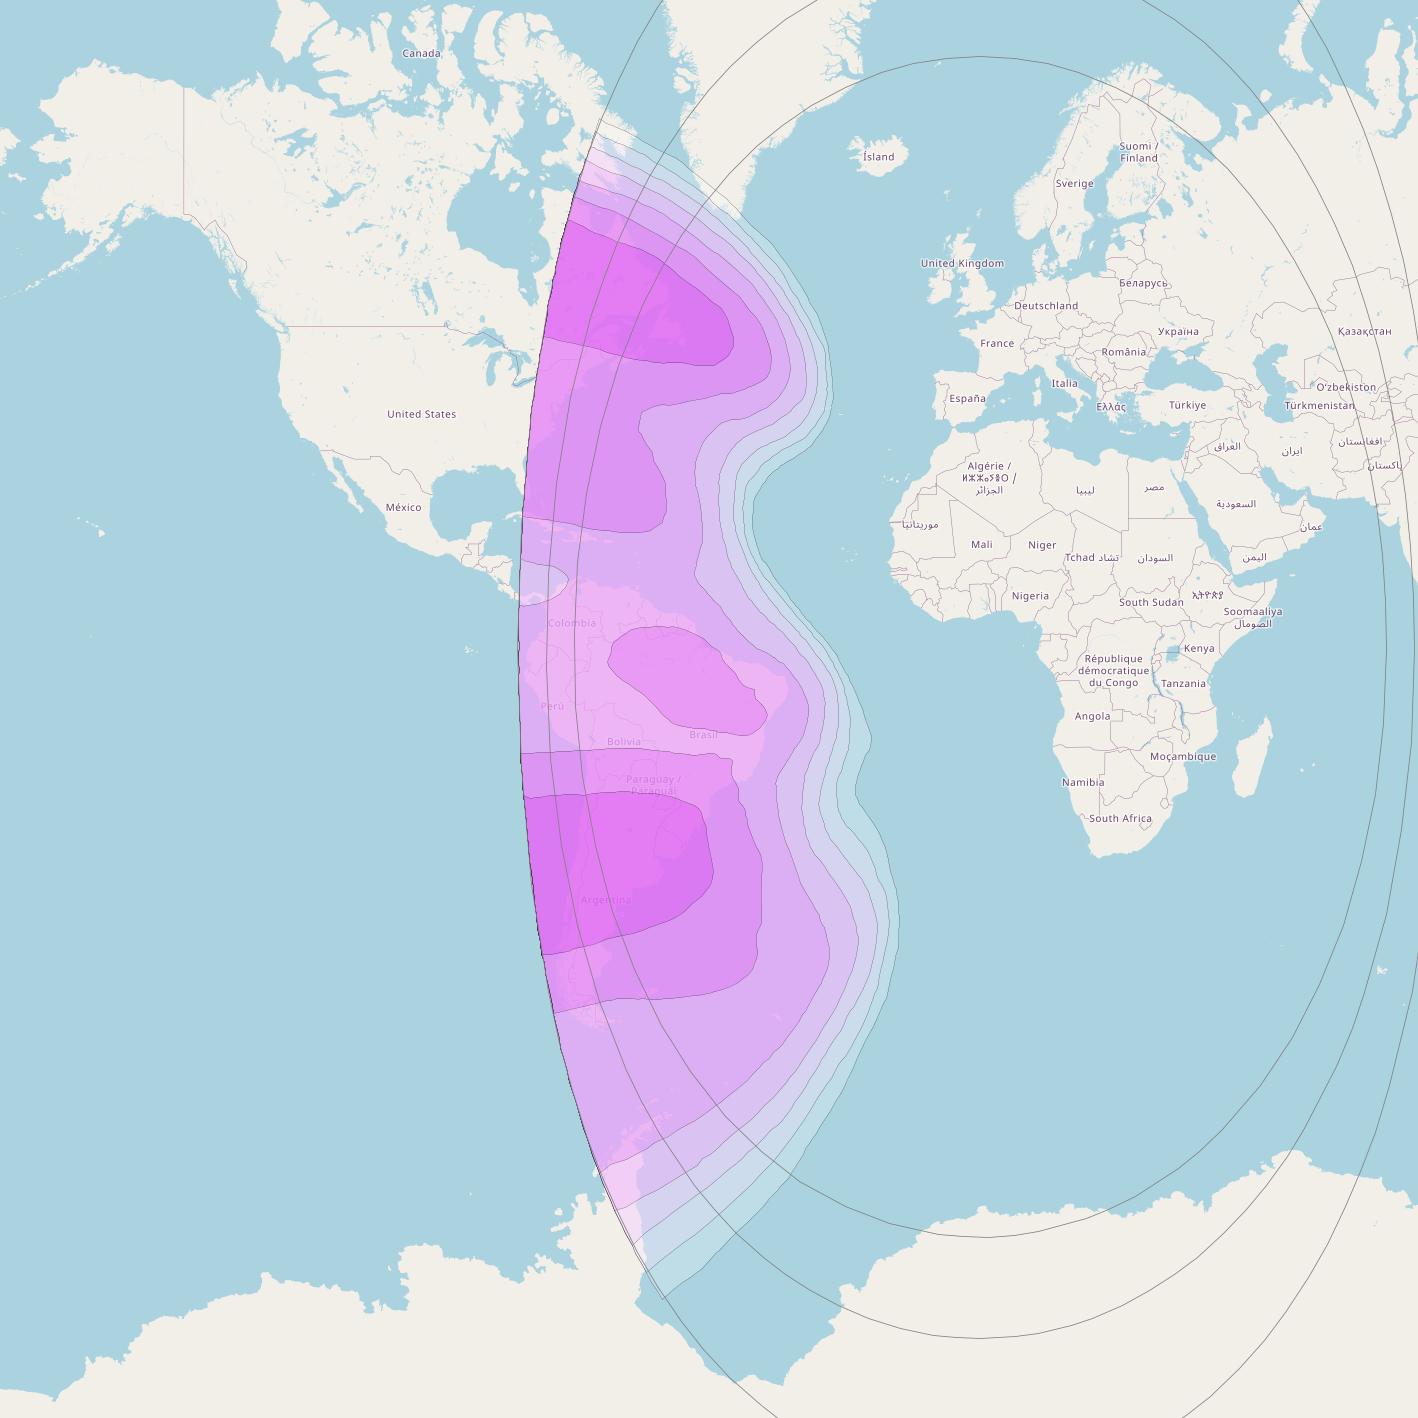 Intelsat 10-02 + MEV2 at 1° W downlink C-band West Hemi Beam coverage map